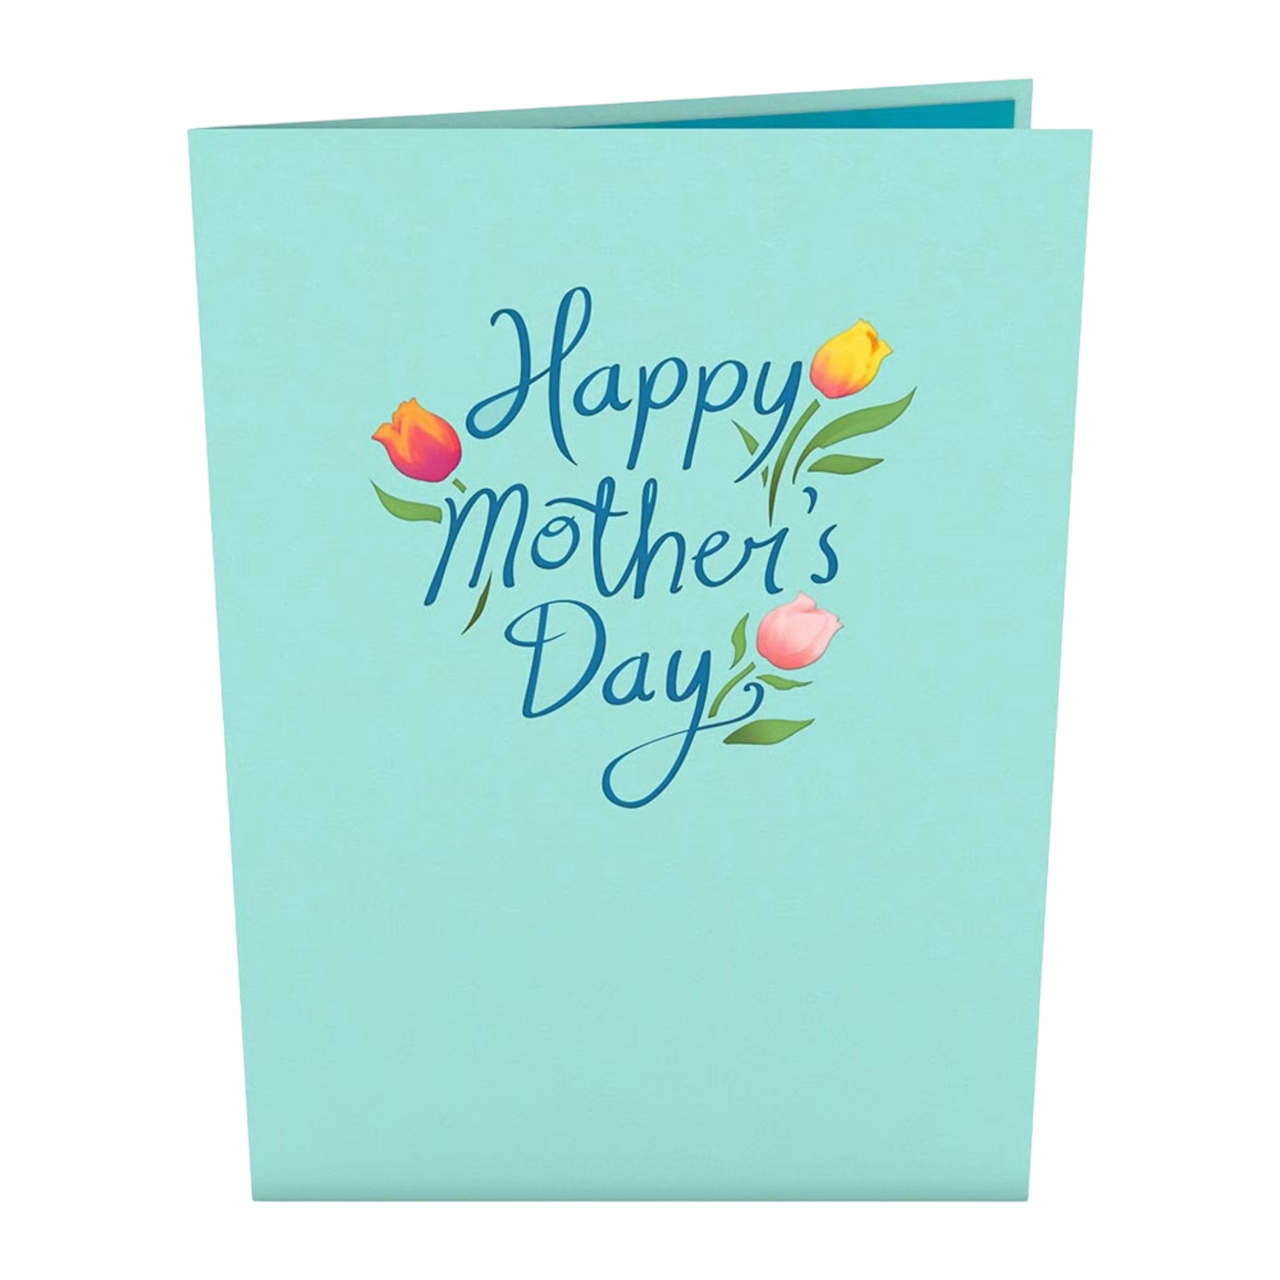 The Best Gift Ever :) Purrfect Mom Mother's Day Pop-Up Card